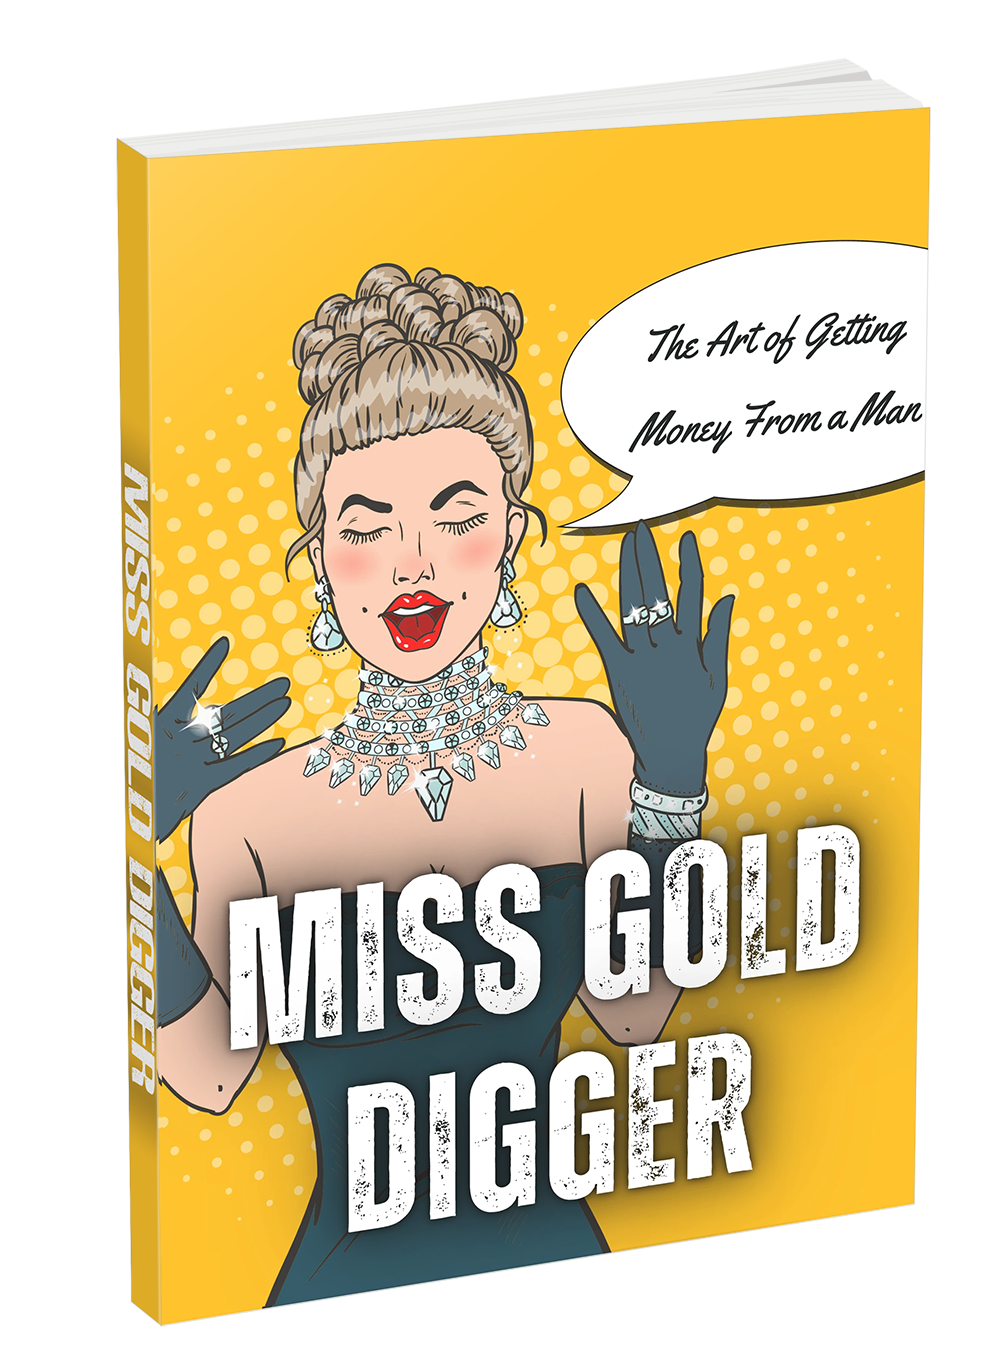 How To Get Men To Buy You Stuff: 16 Proven Strategies To Seduce Any Man To  Spoil You With Money, Gifts, and More (Goldigger Secrets): Gold, Goddess:  9781793950956: : Books